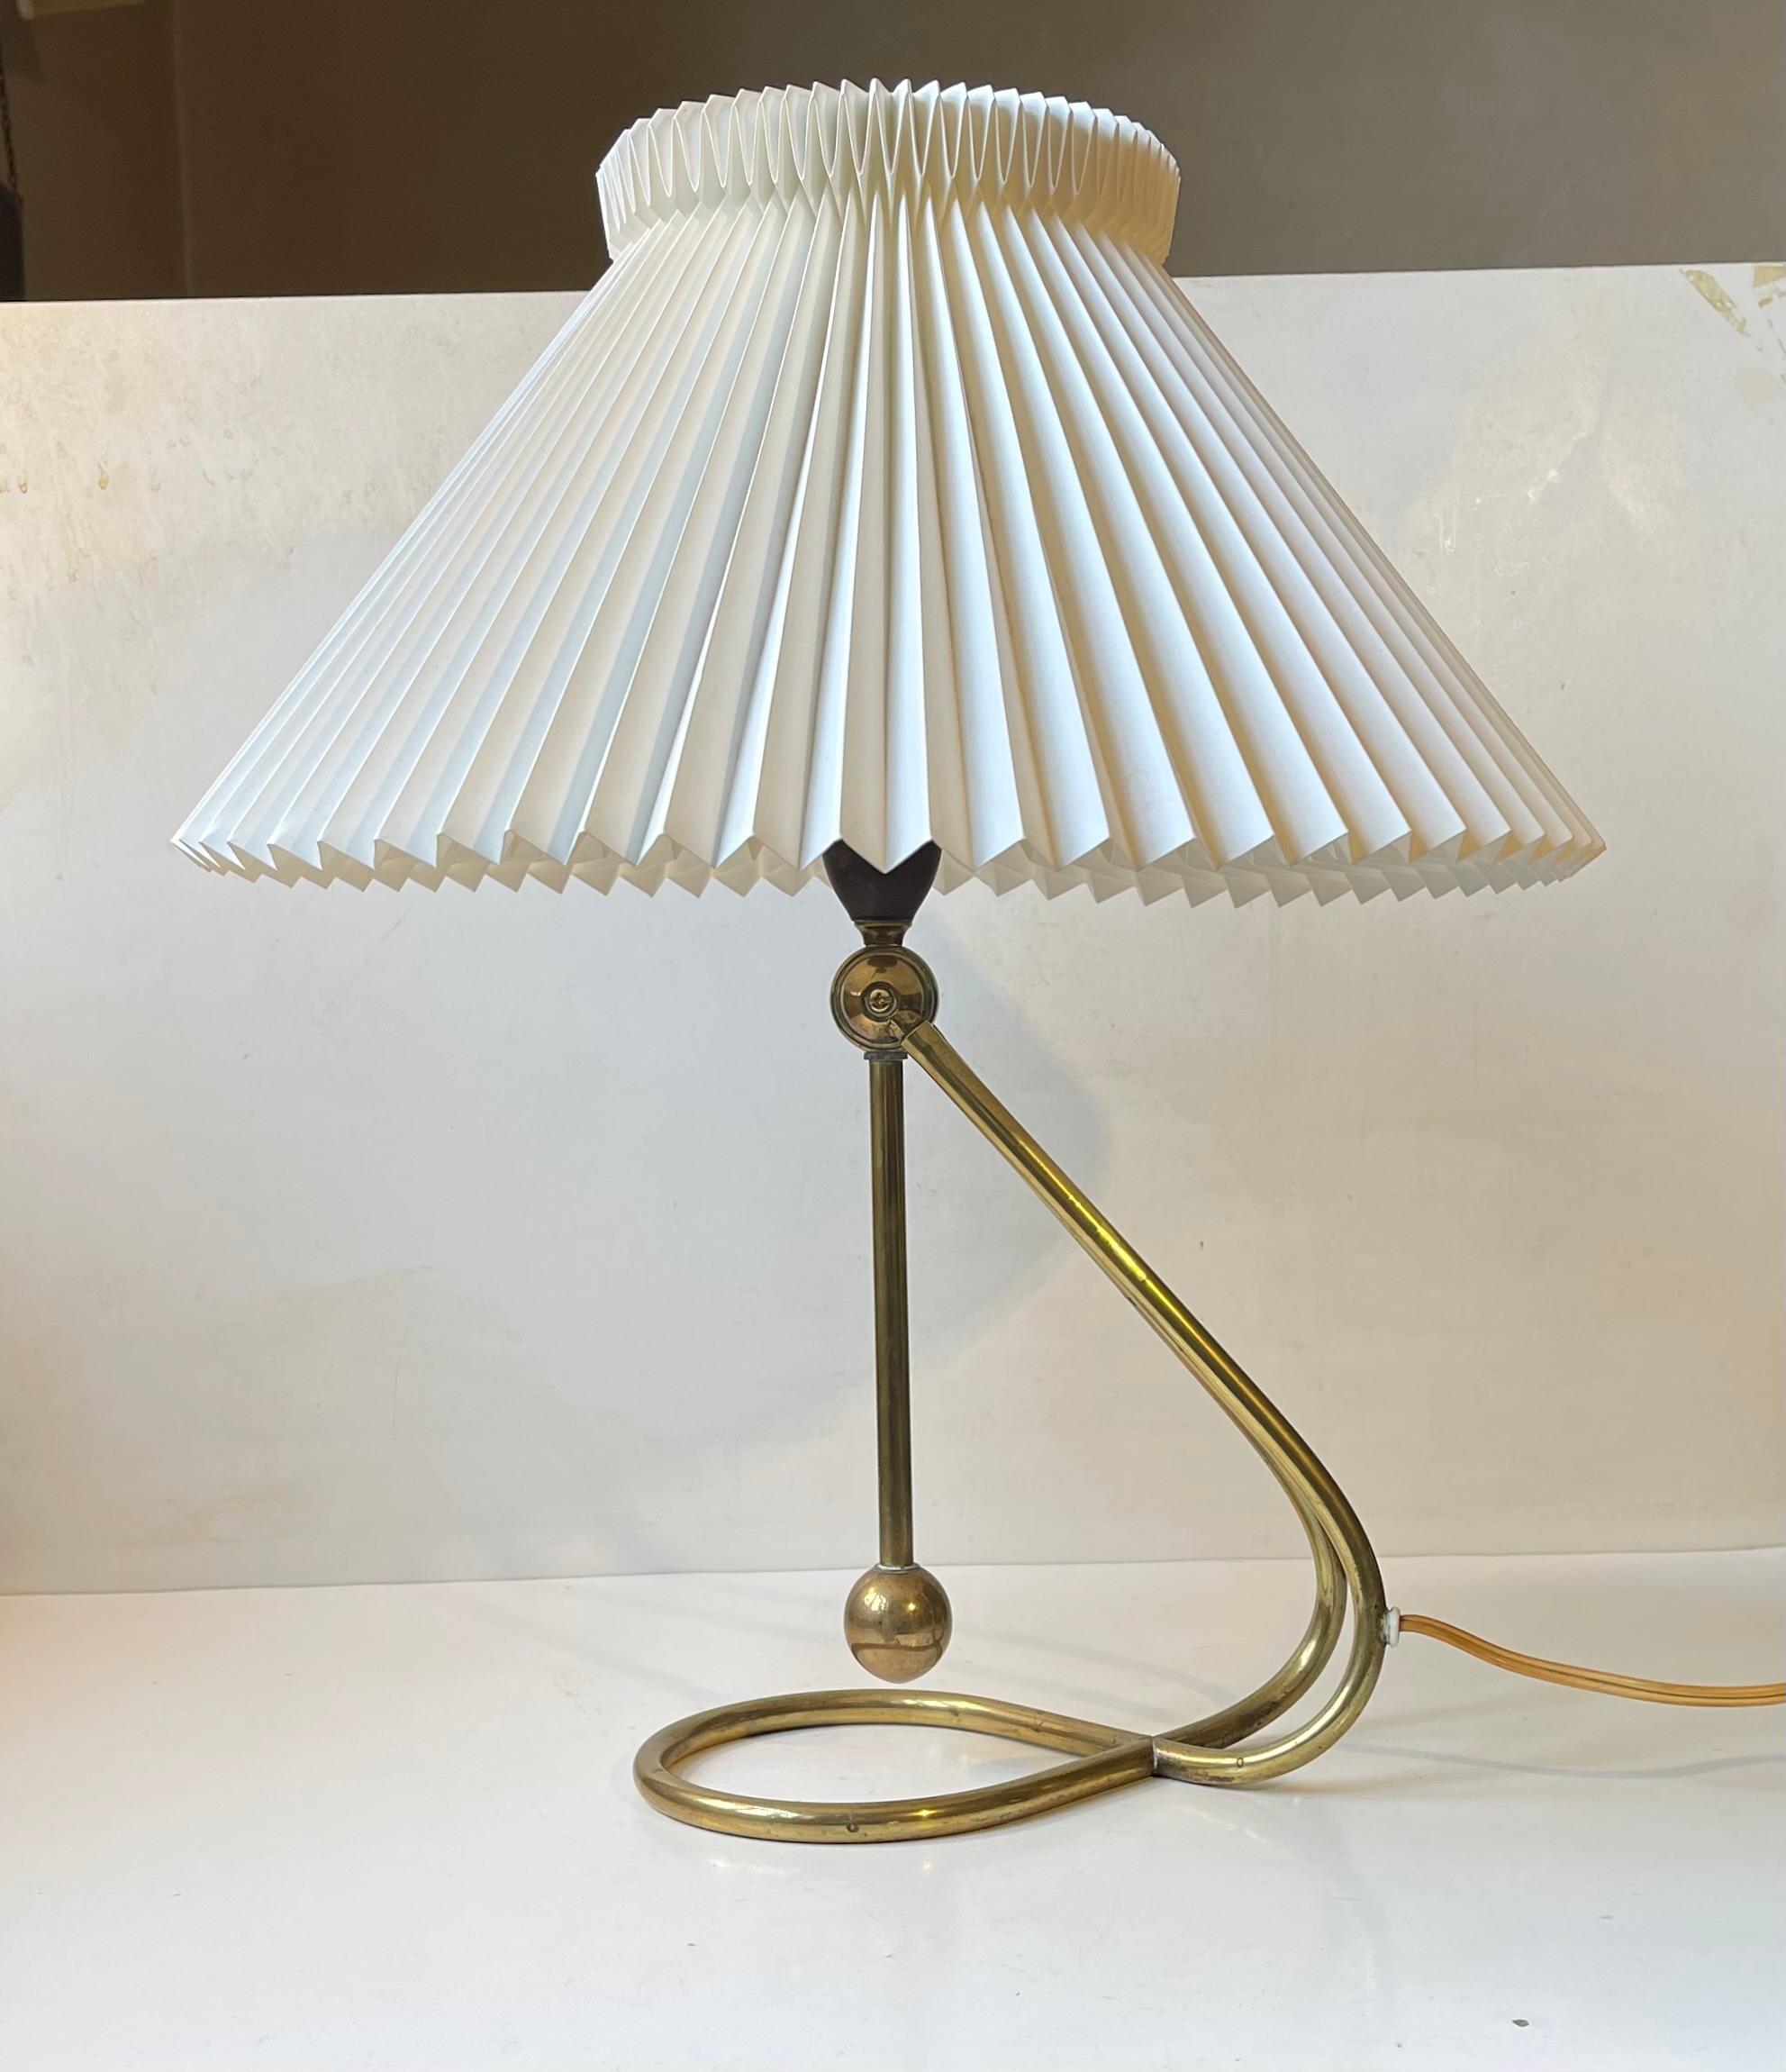 Danish Le Klint - Vintage Adjustable Brass Table or Wall Lamp, 1950s For Sale